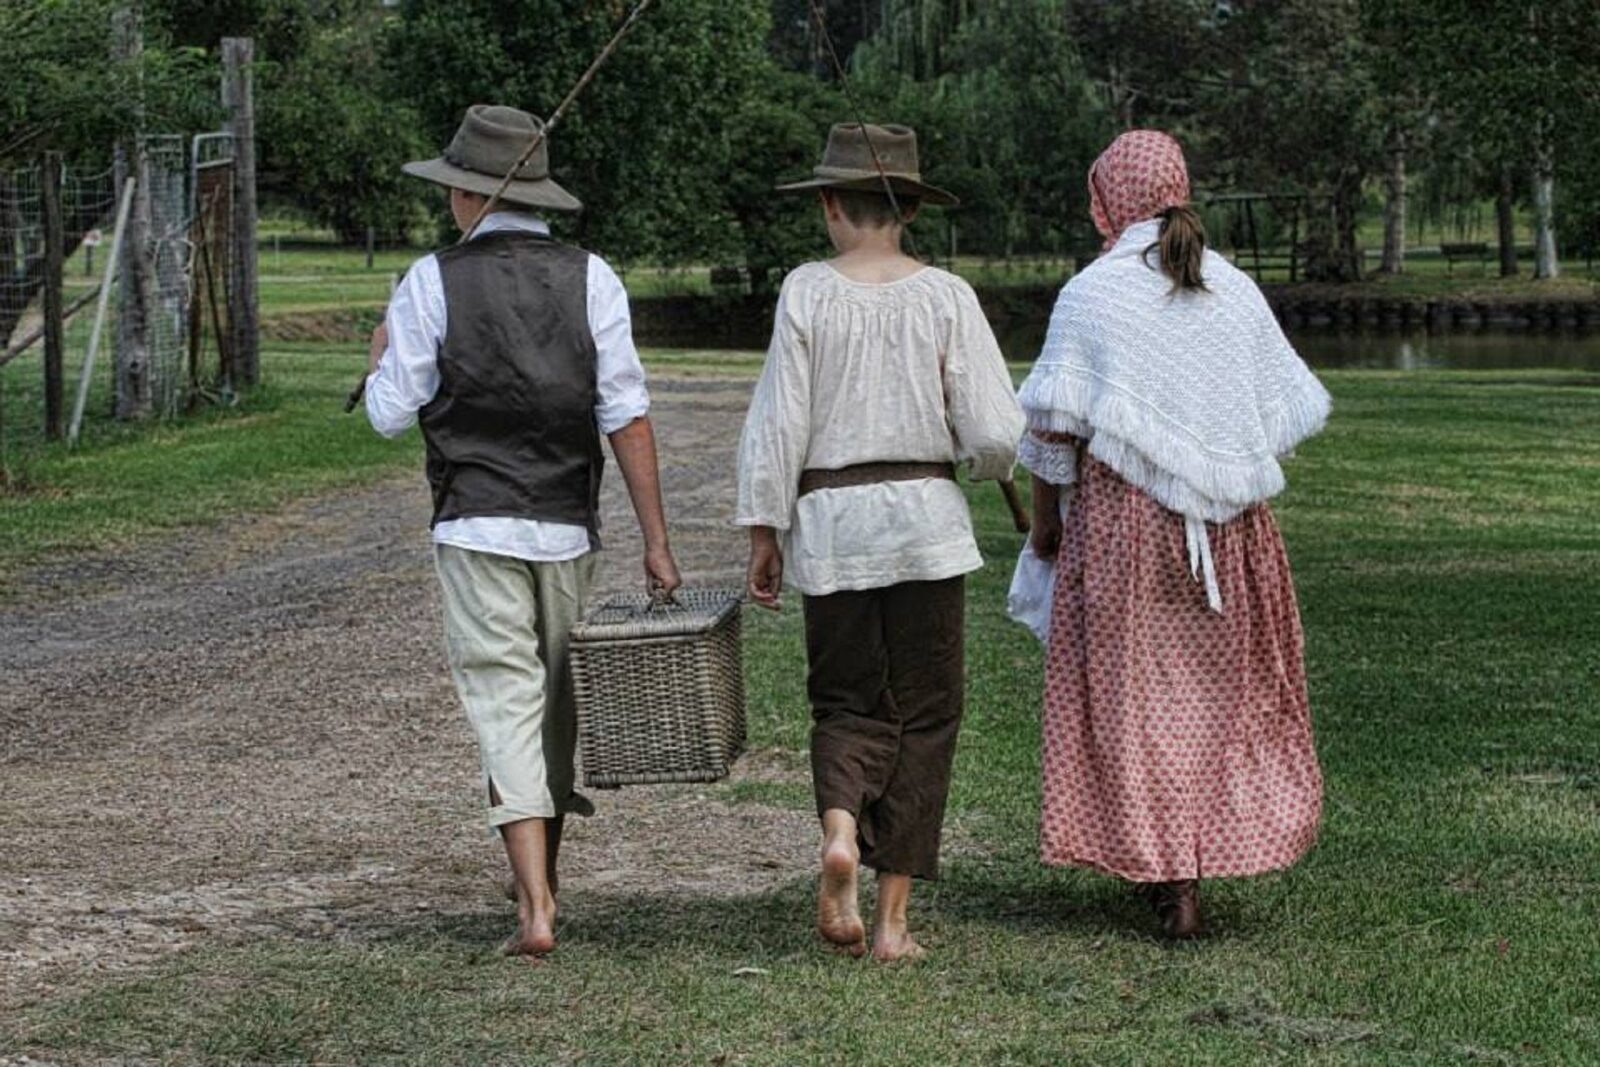 Relax at The Village - re-enactments of times past